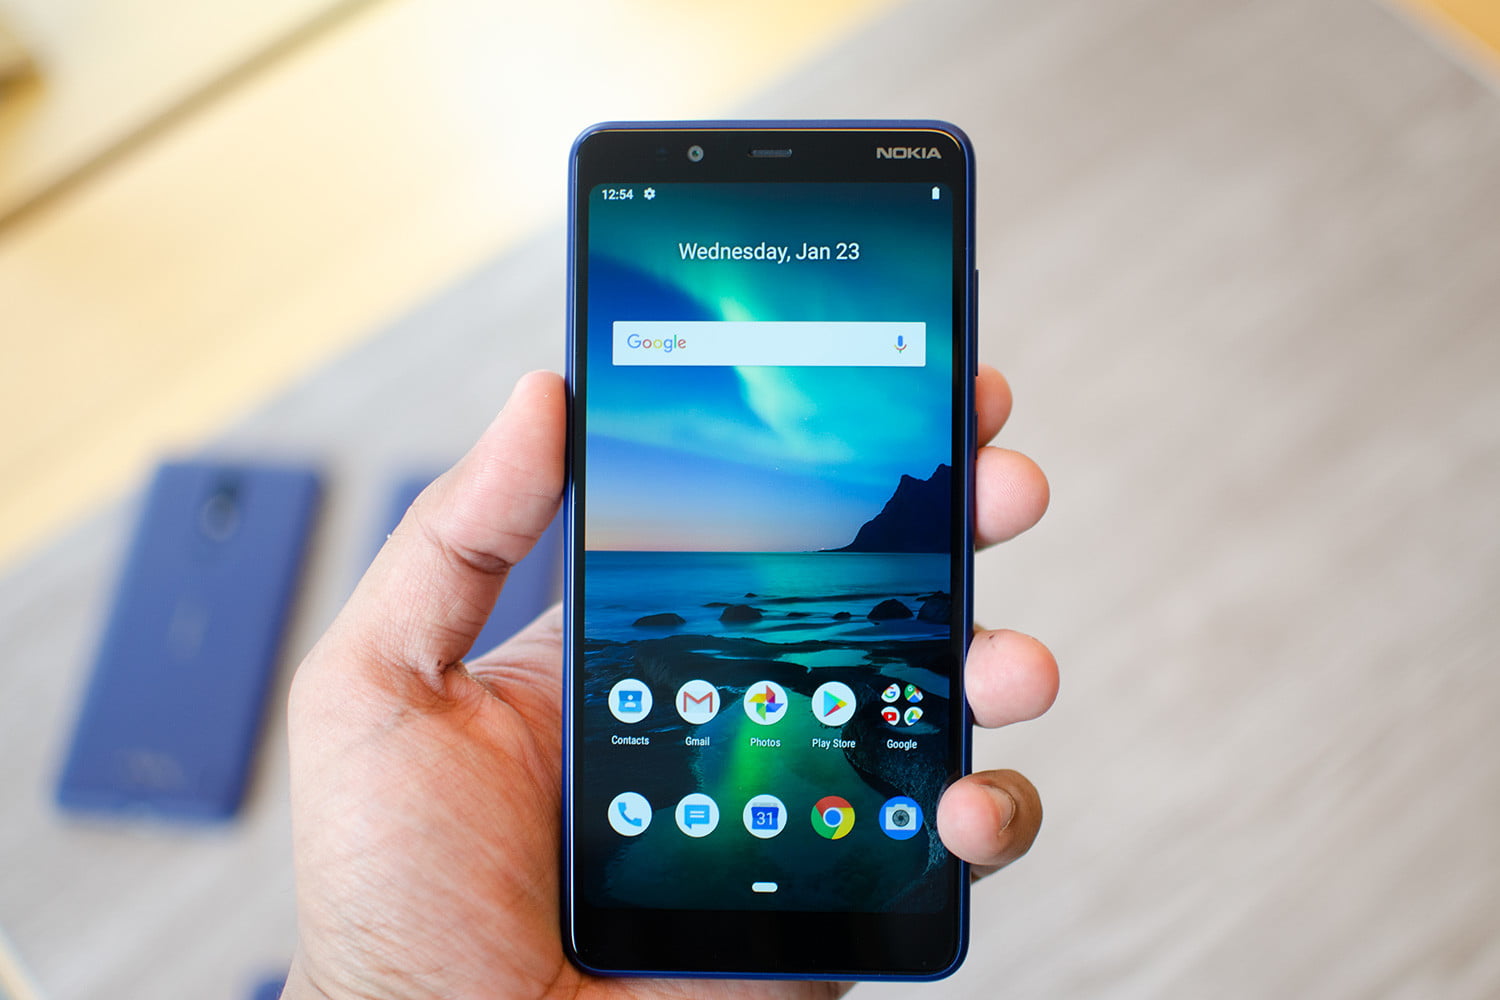 Nokia 3.1 Plus vs Moto E5: Which Is The Better Budget Smartphone?